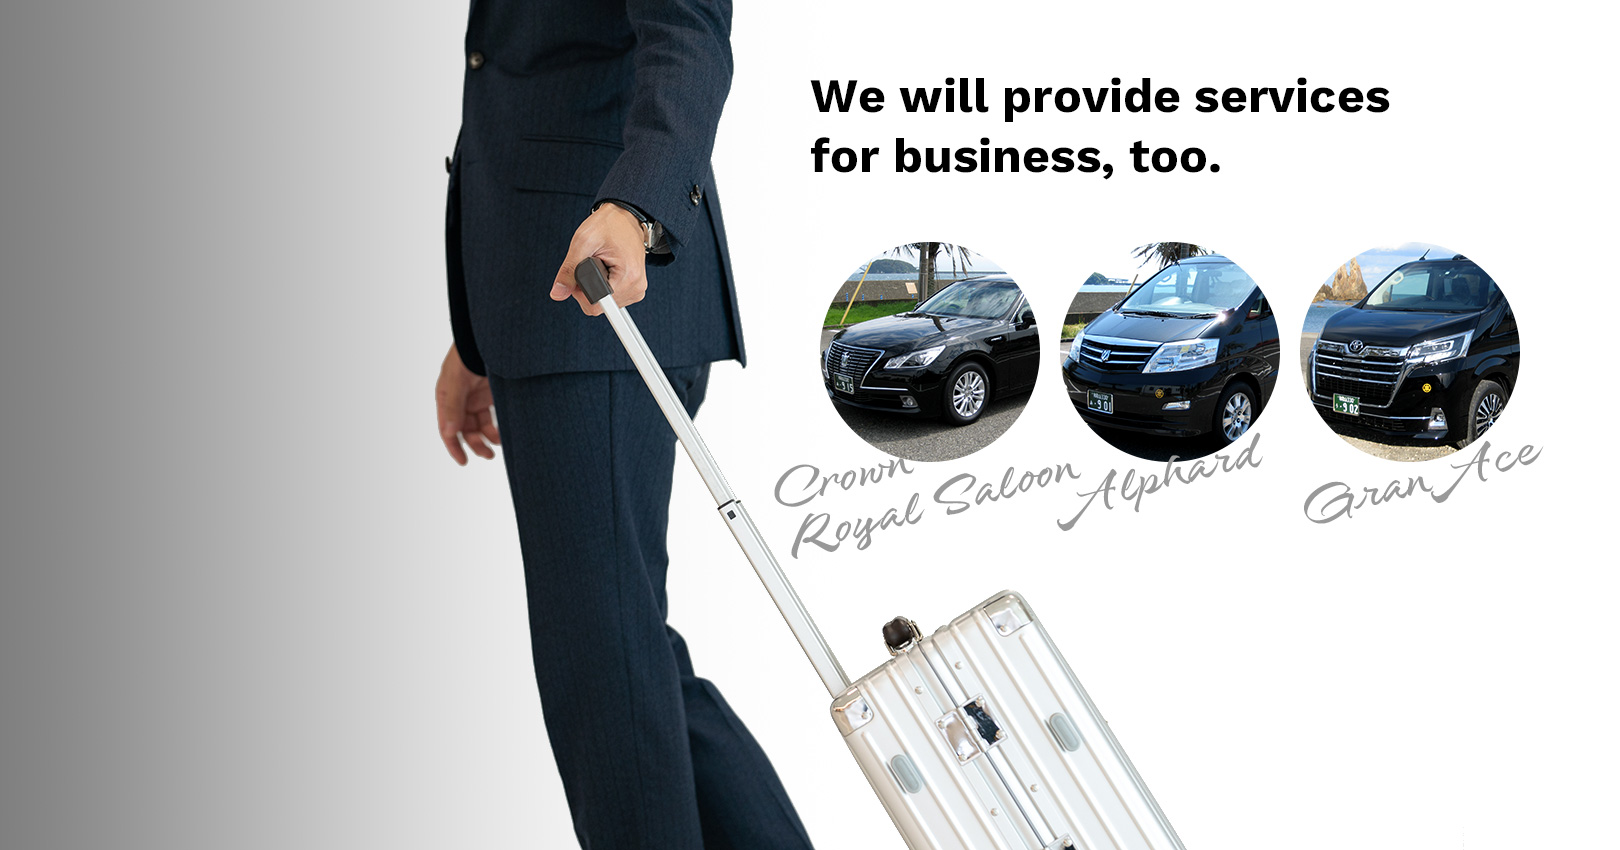 We will provide services for business, too.